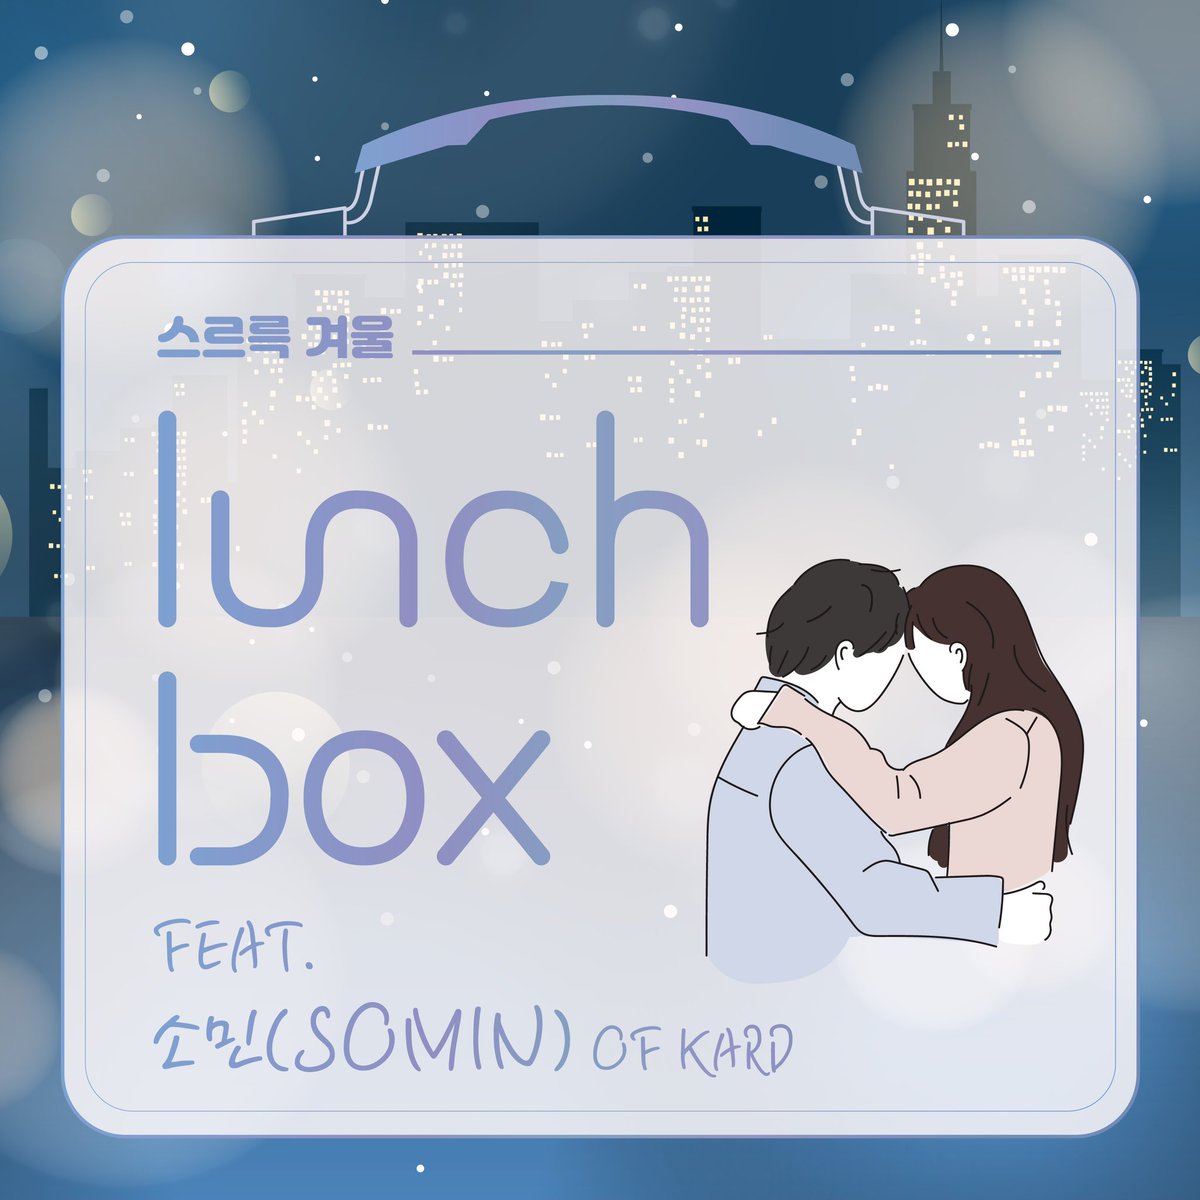 Image for [Somin] lunCHbox 'Slowly Winter', which KARD Somin participated in, has been released on various music sites! Thank you for your interest in HIDDEN KARD🥰 🎵 https://t.co/rUcKpP7Ajb KARD card SOMIN Jeon So-min lunCHbox Slow winter https://t.co/C9RGYX5vu3